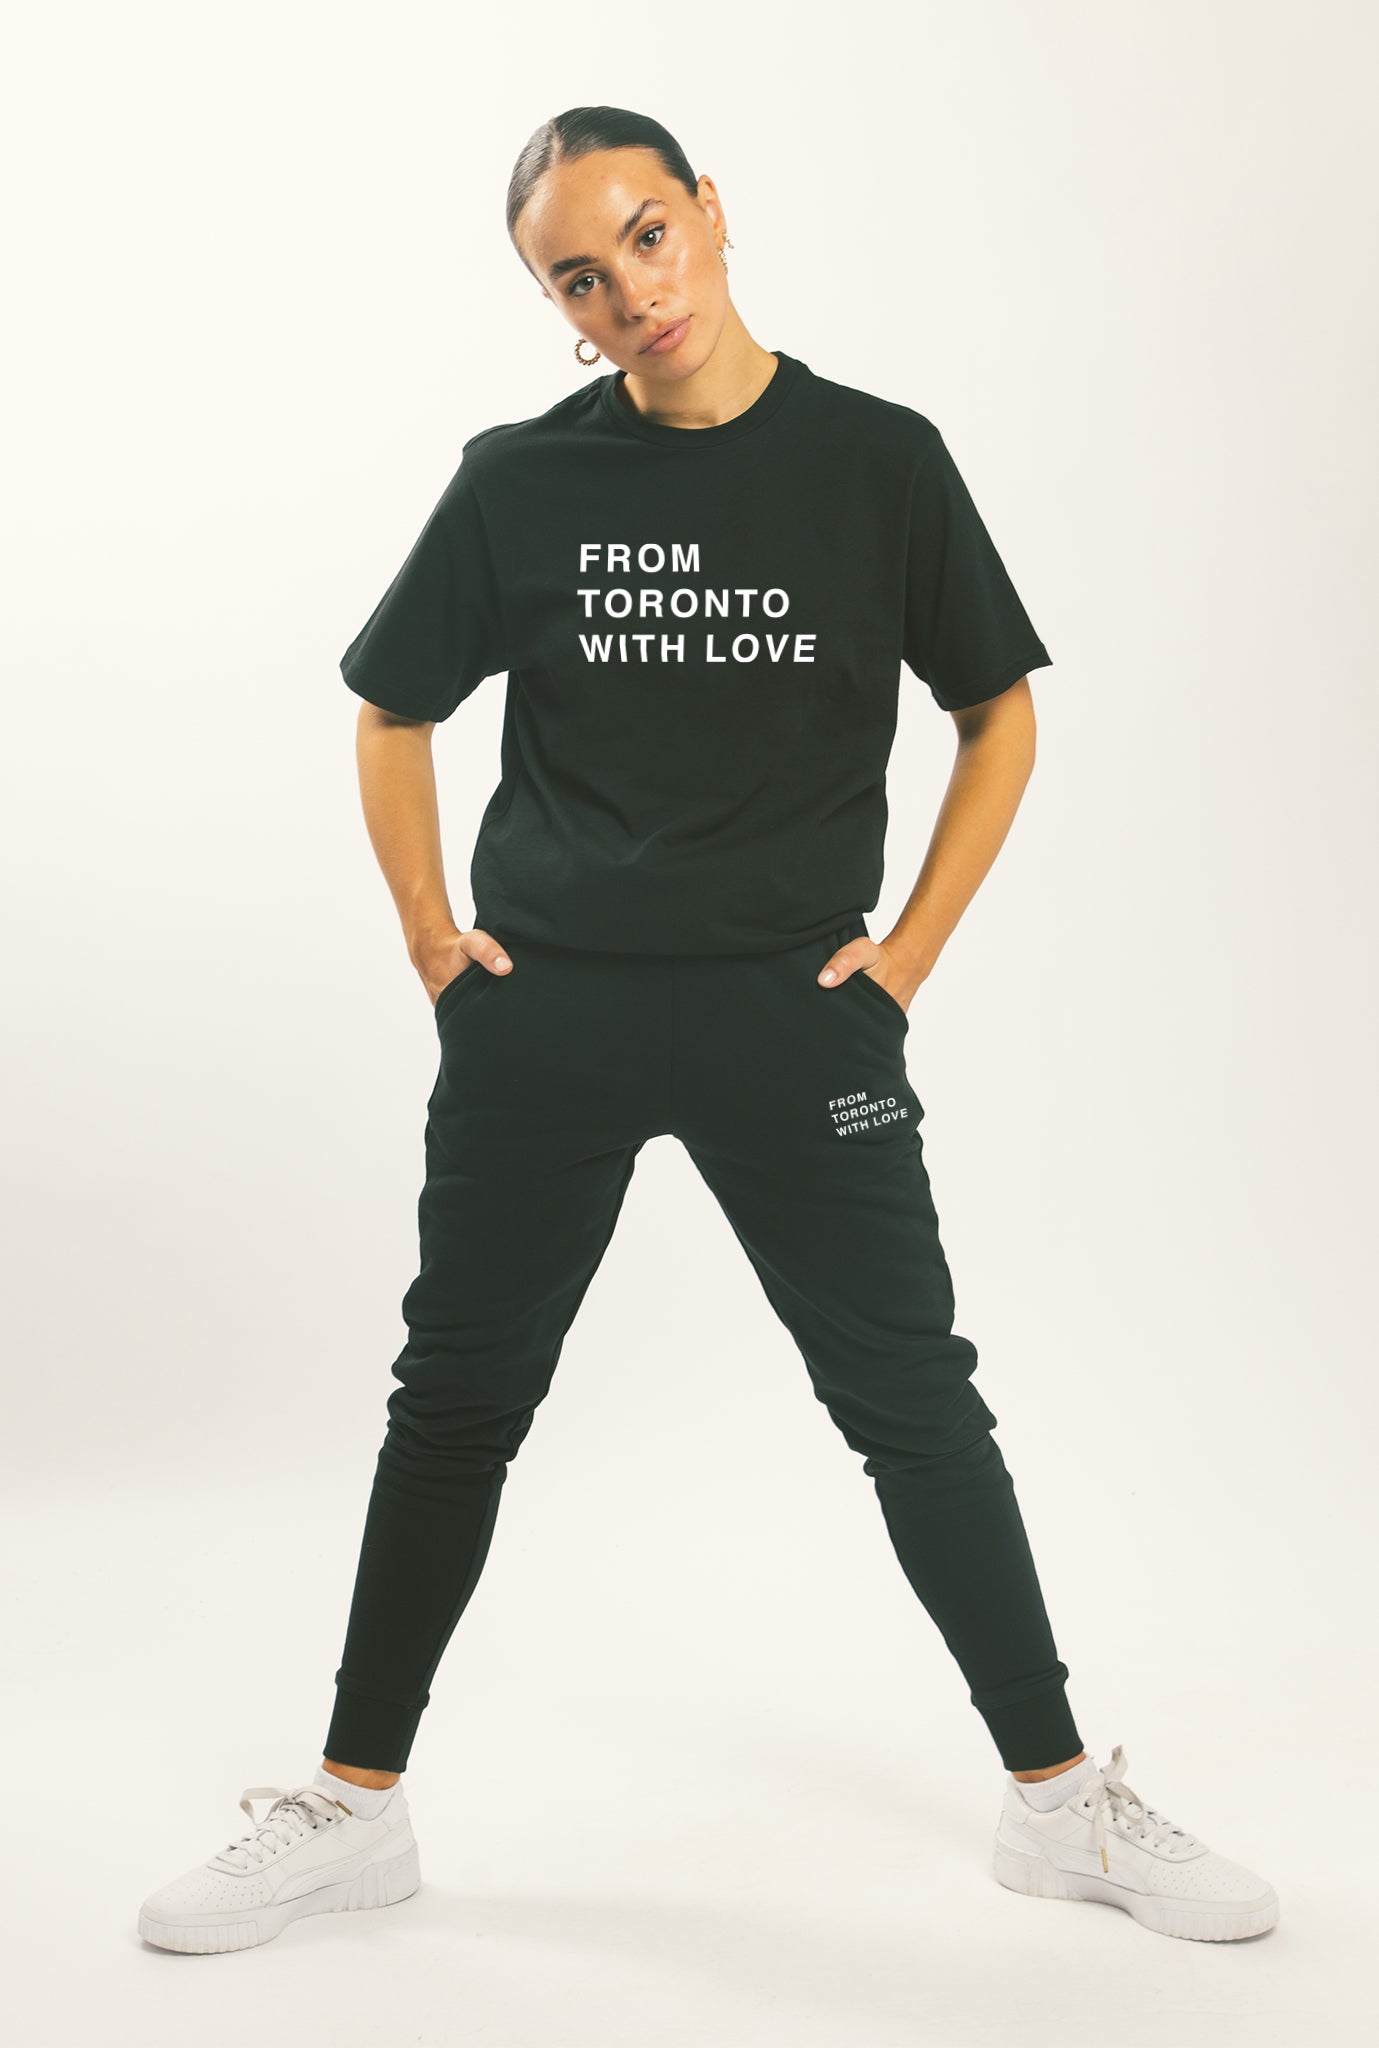 From Toronto with Love T-Shirt - Black